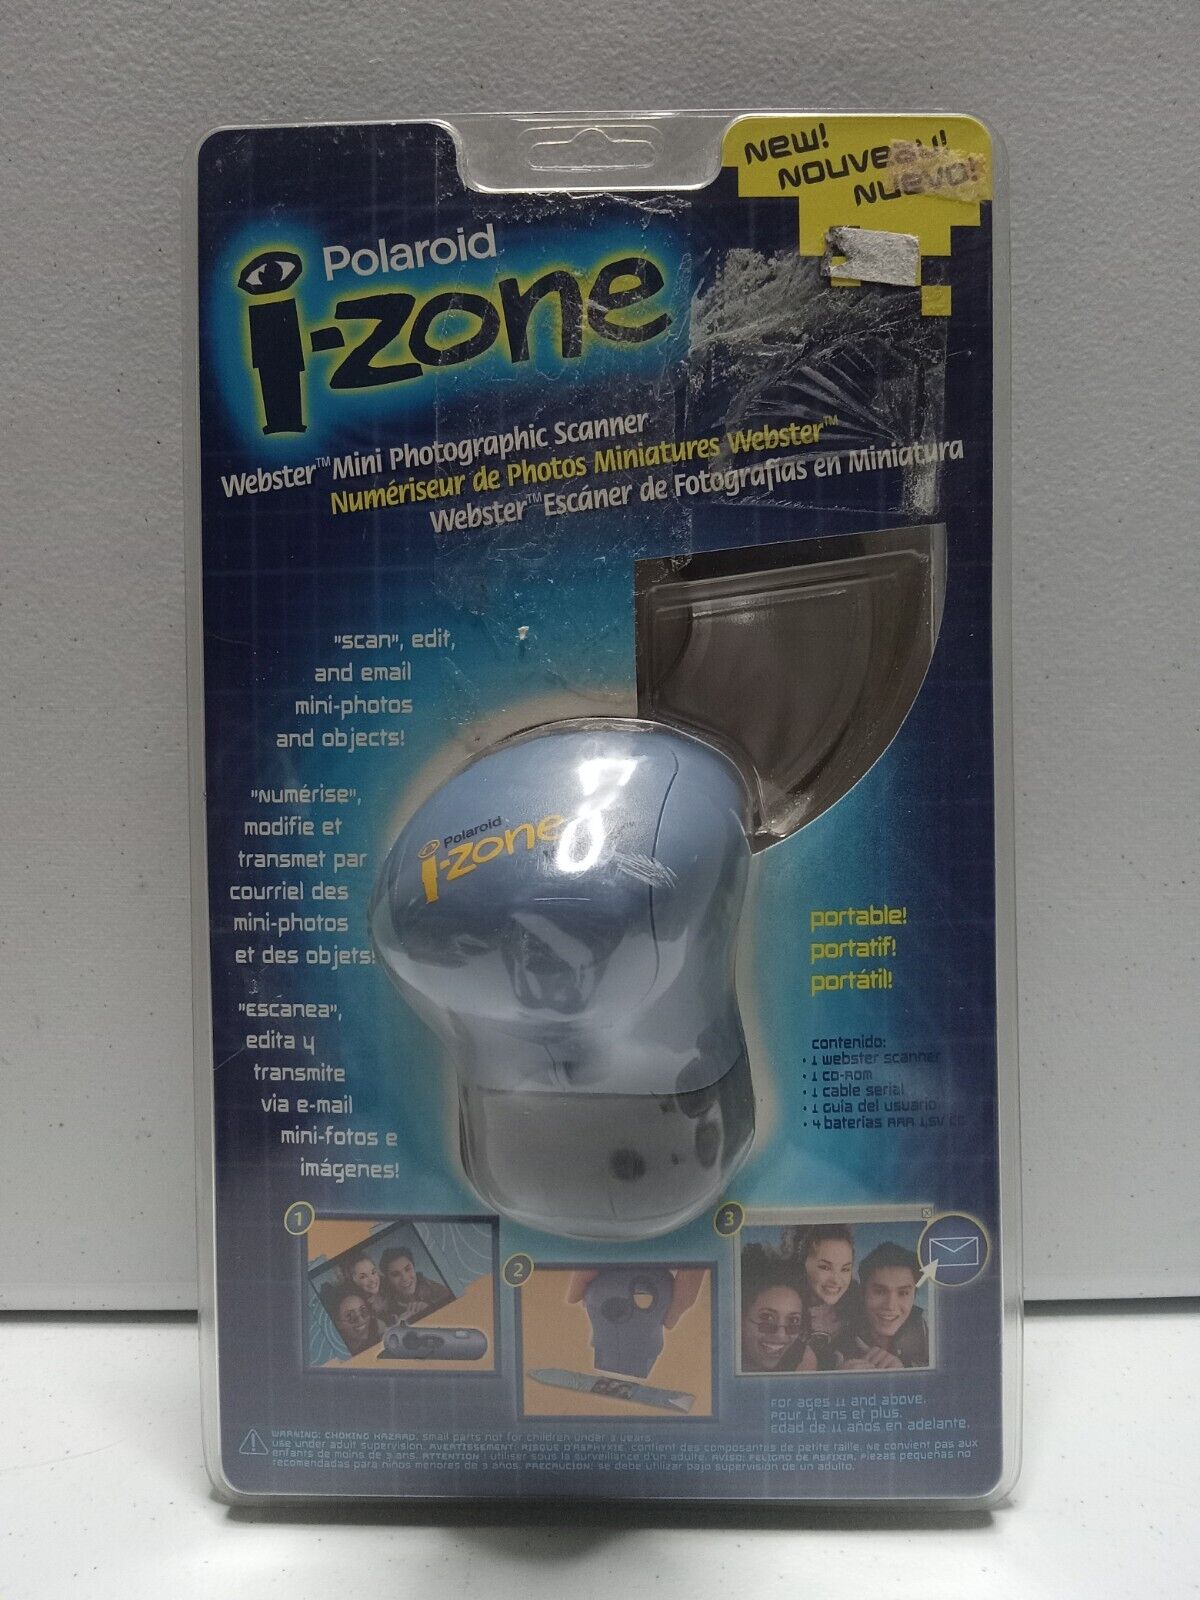 New Polaroid I-Zone Webster Mini Photographic Scanner For Sticker Film Cameras